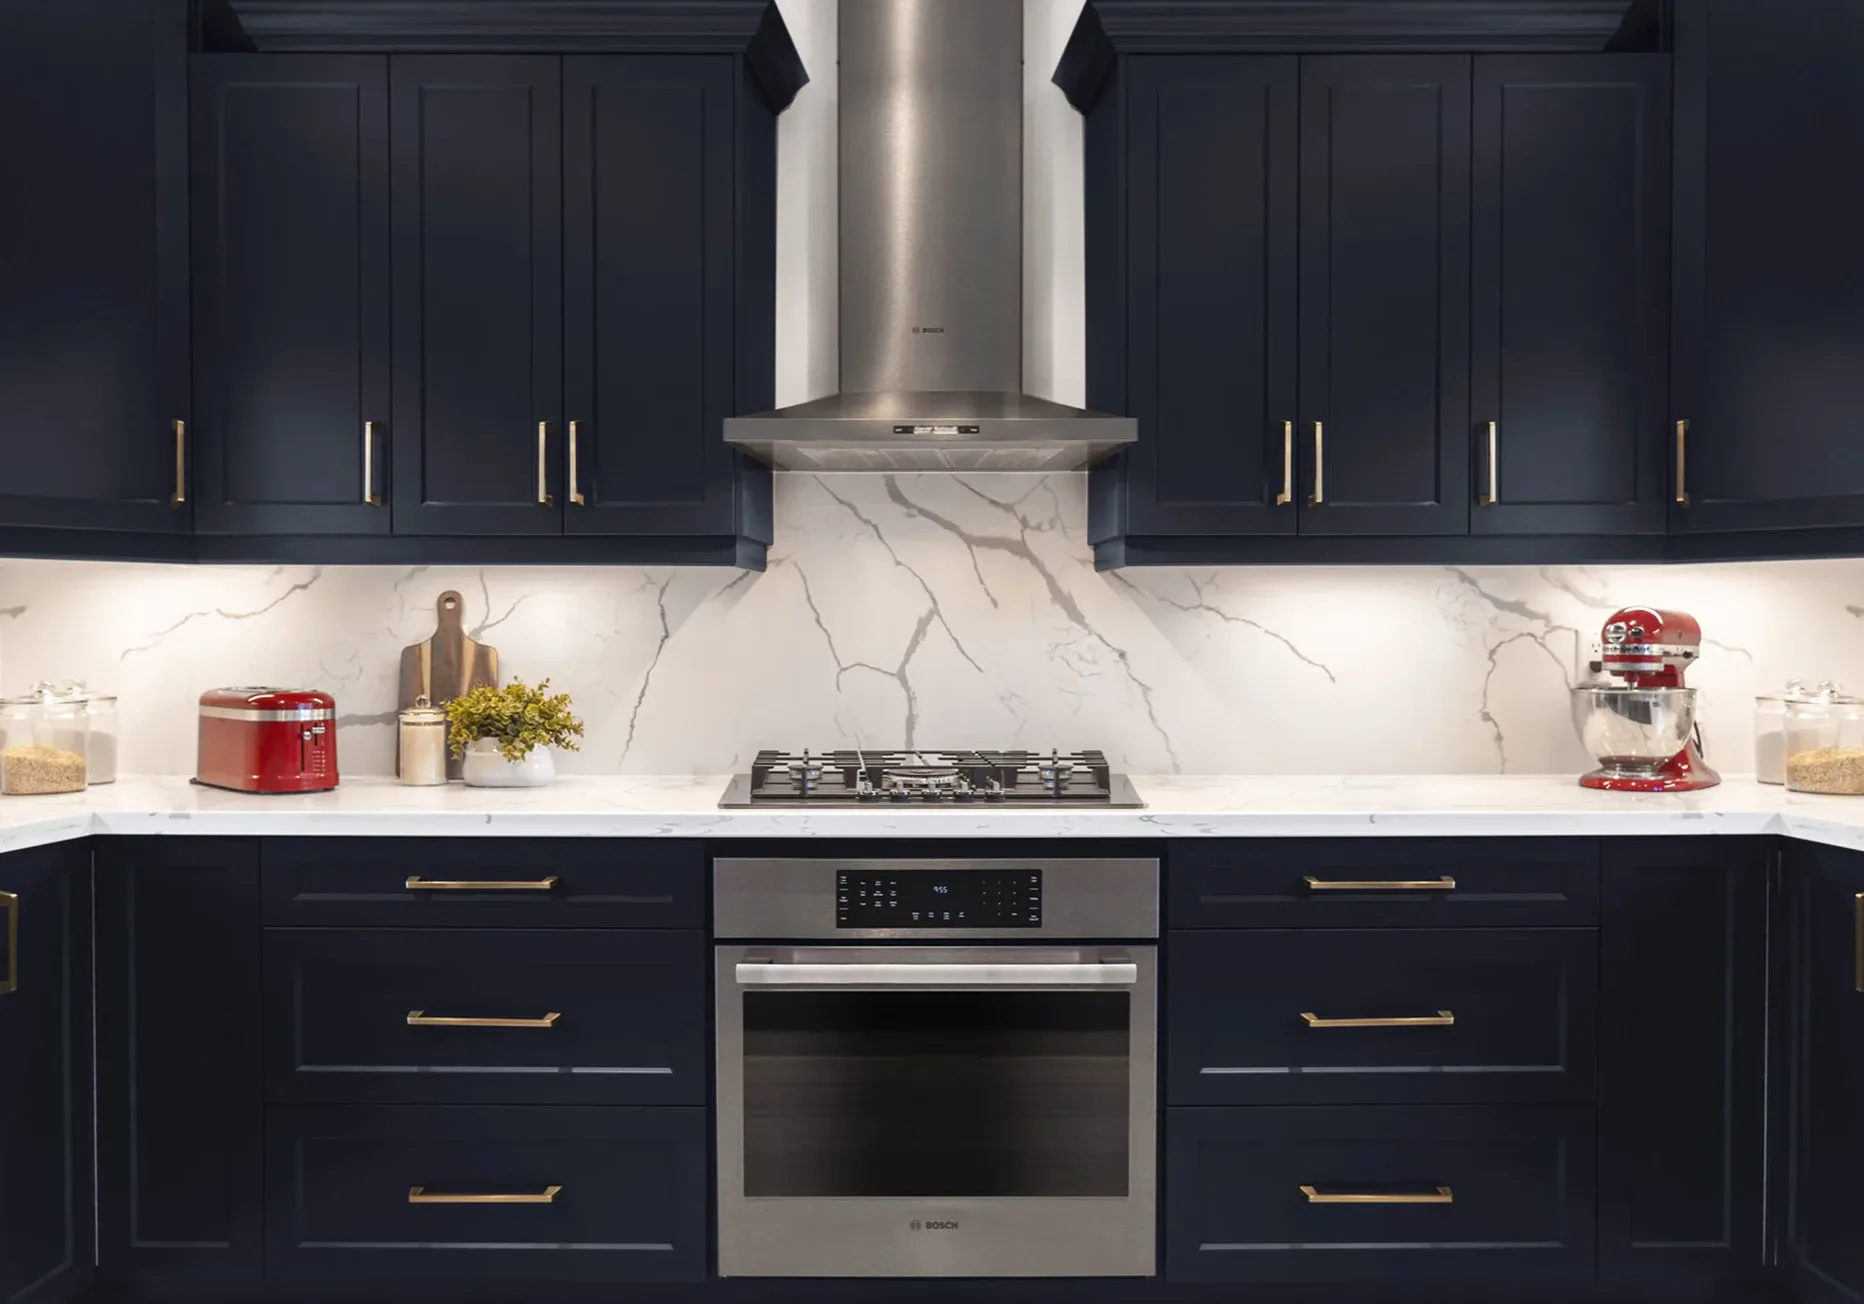 A a modern kitchen with dark blue cabinetry, silver handles, white counter tops and dark stainless steel stove.